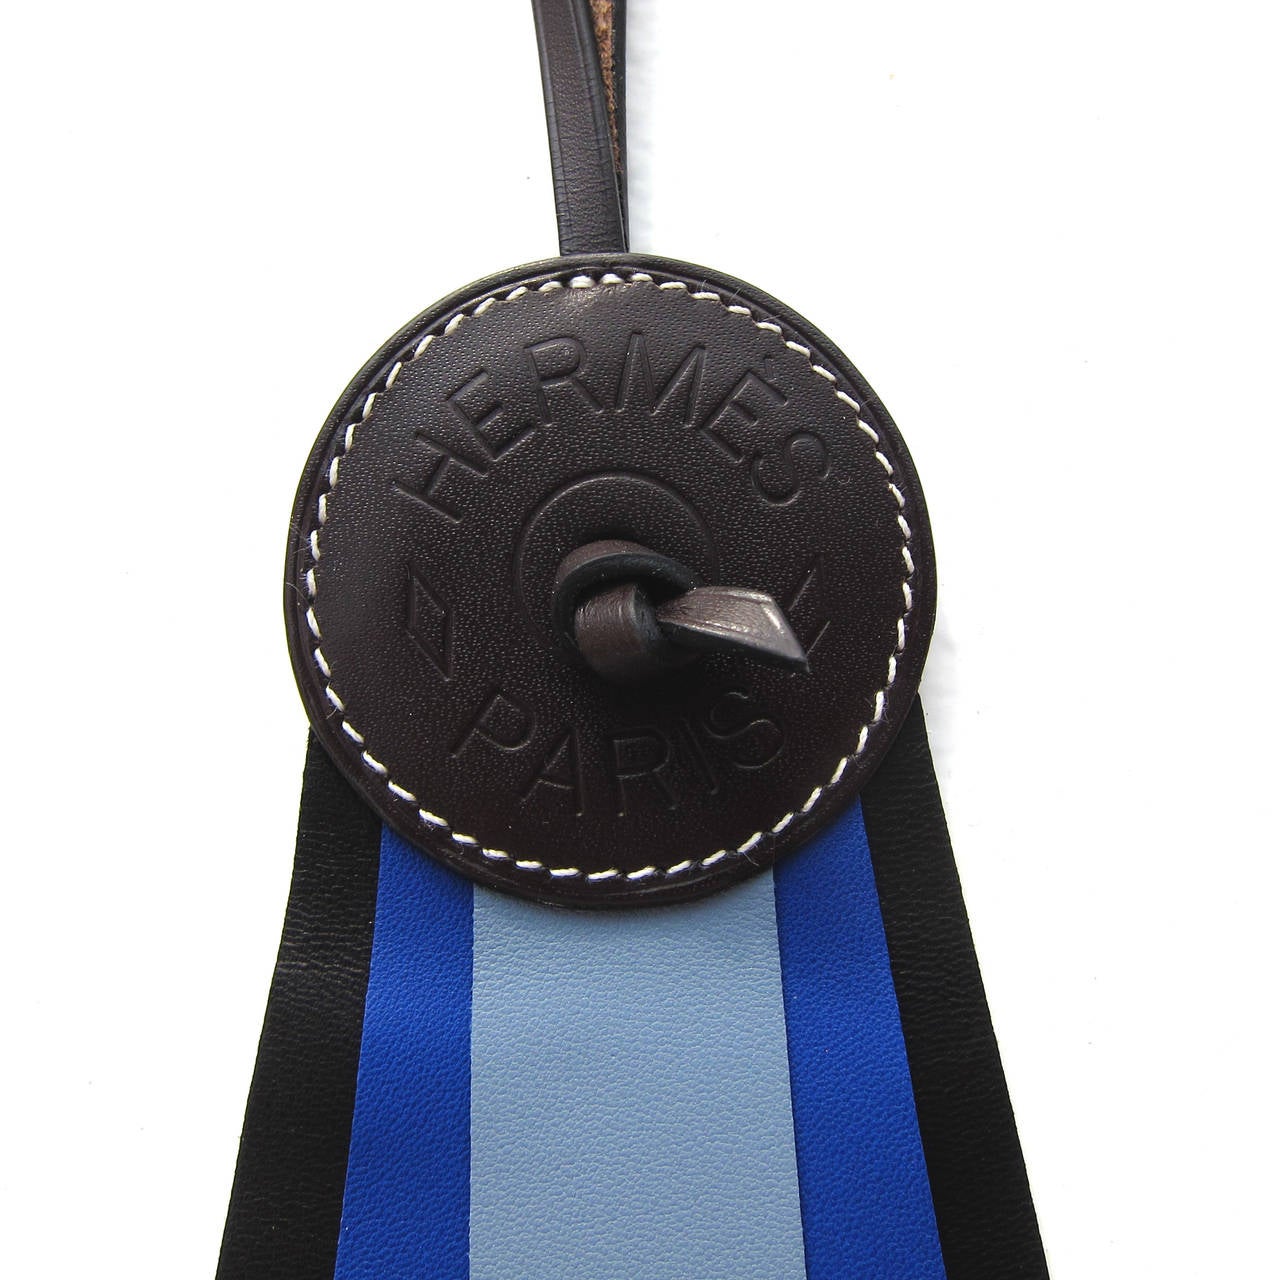 Hermes Paddock Flot Horse Ribbon Charm Equestrian Love

Limited edition collector's item
Black/ Blue Electric / Blue Lin Paddock Flot Leather Charm
Brand new in box coming with Hermes presentation gift box and ribbon
Store fresh, never